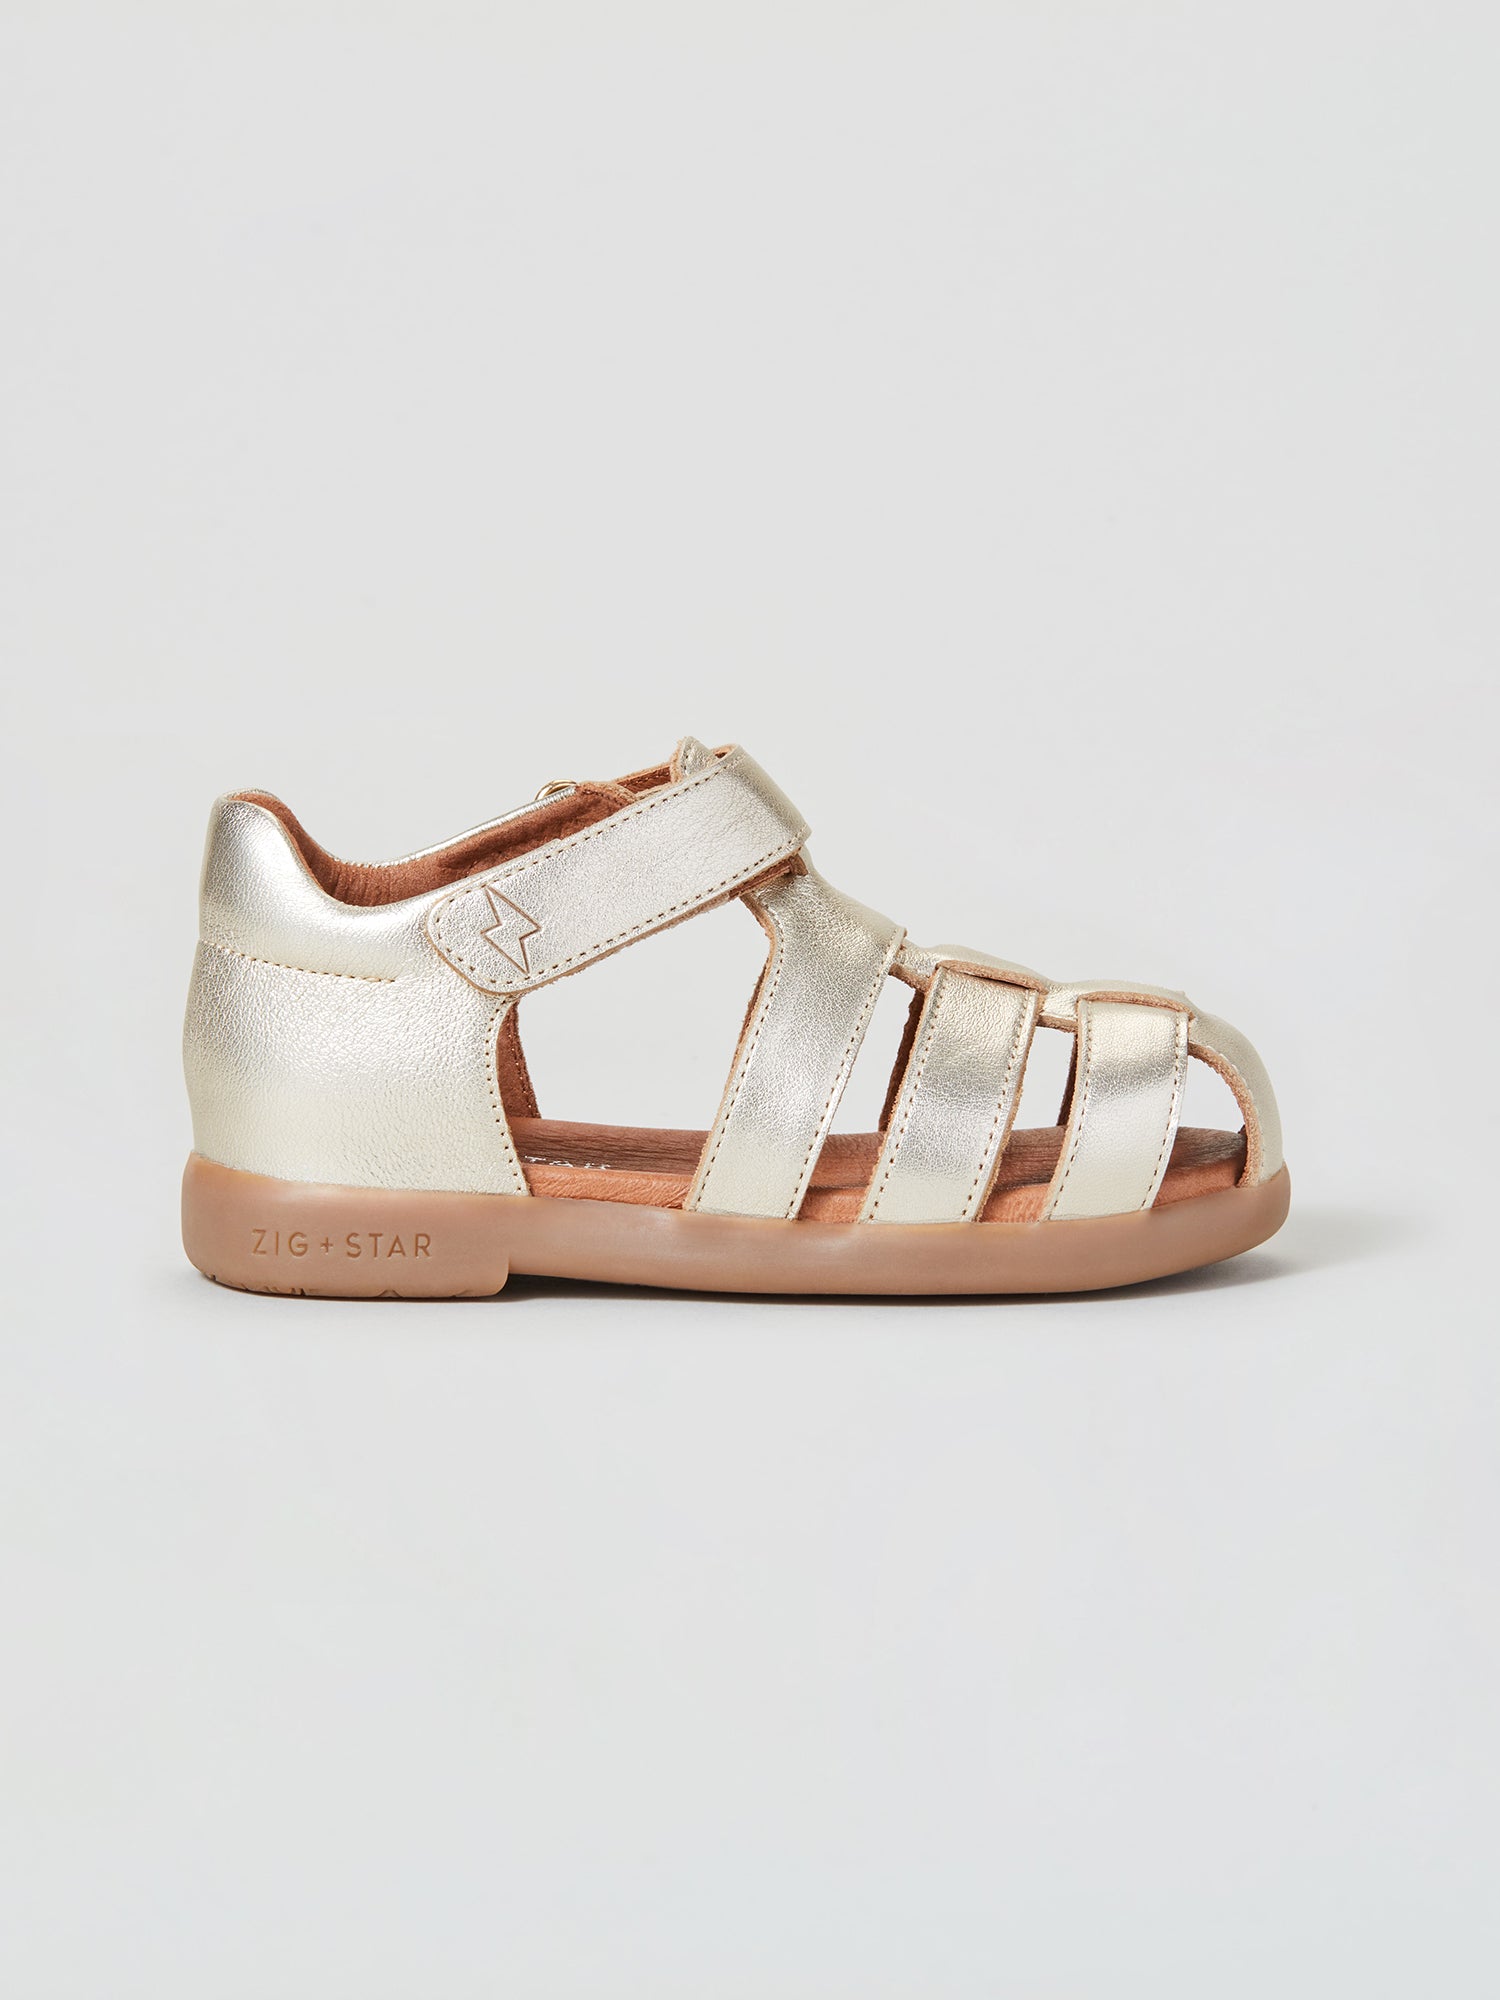 Sandals at Zig + Star – Zig and Star